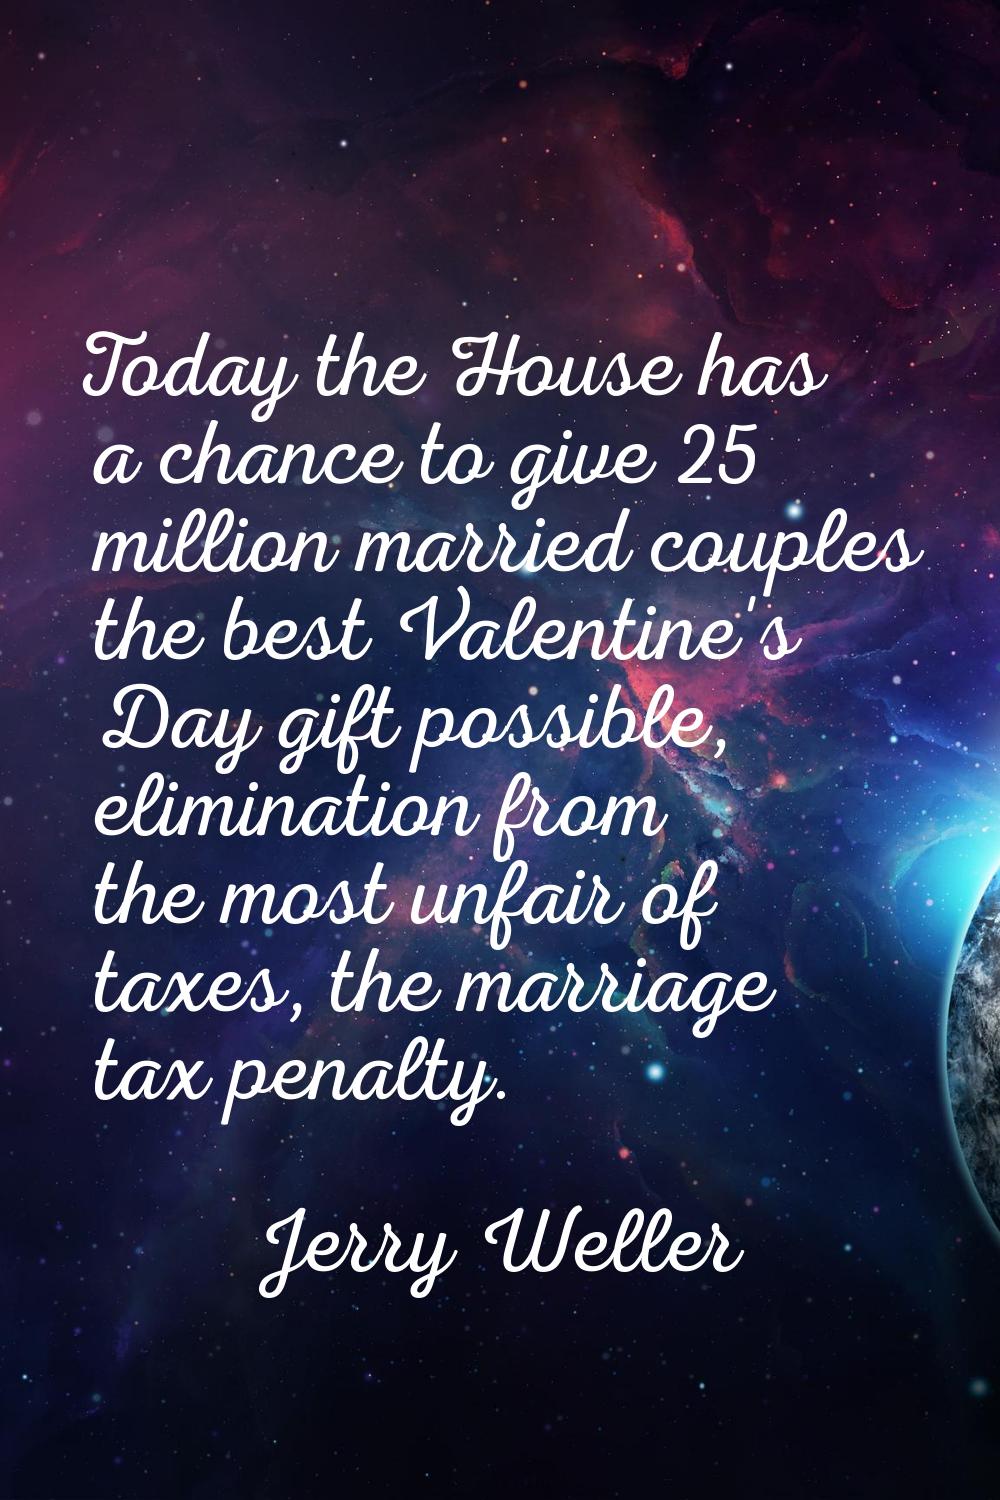 Today the House has a chance to give 25 million married couples the best Valentine's Day gift possi